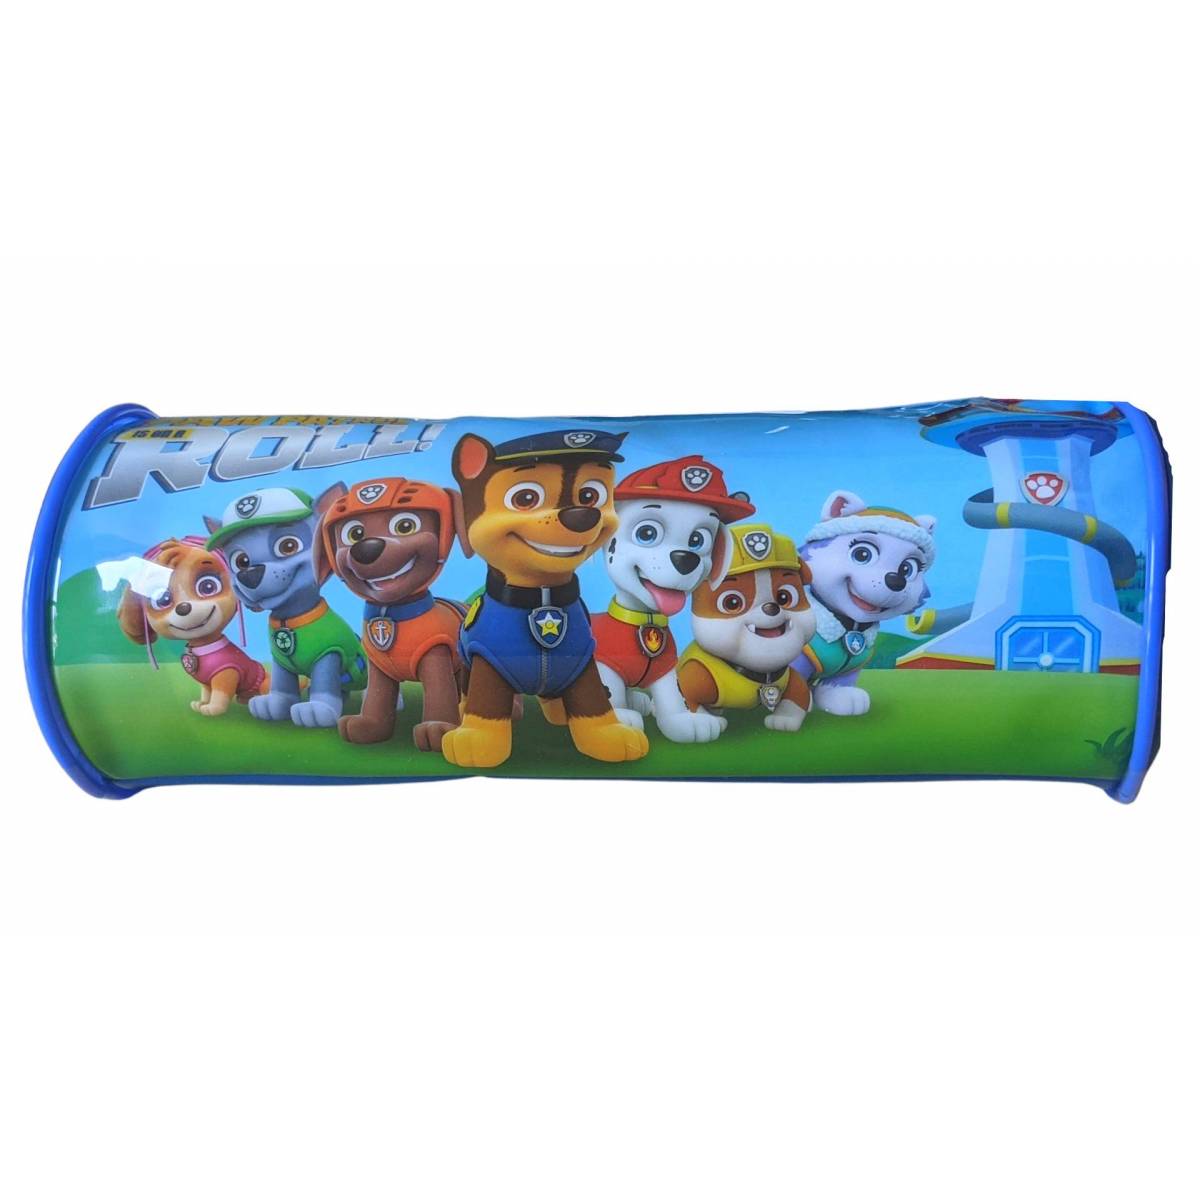 Case Round Blue and silicone Paw Patrol 22 x 10 cm